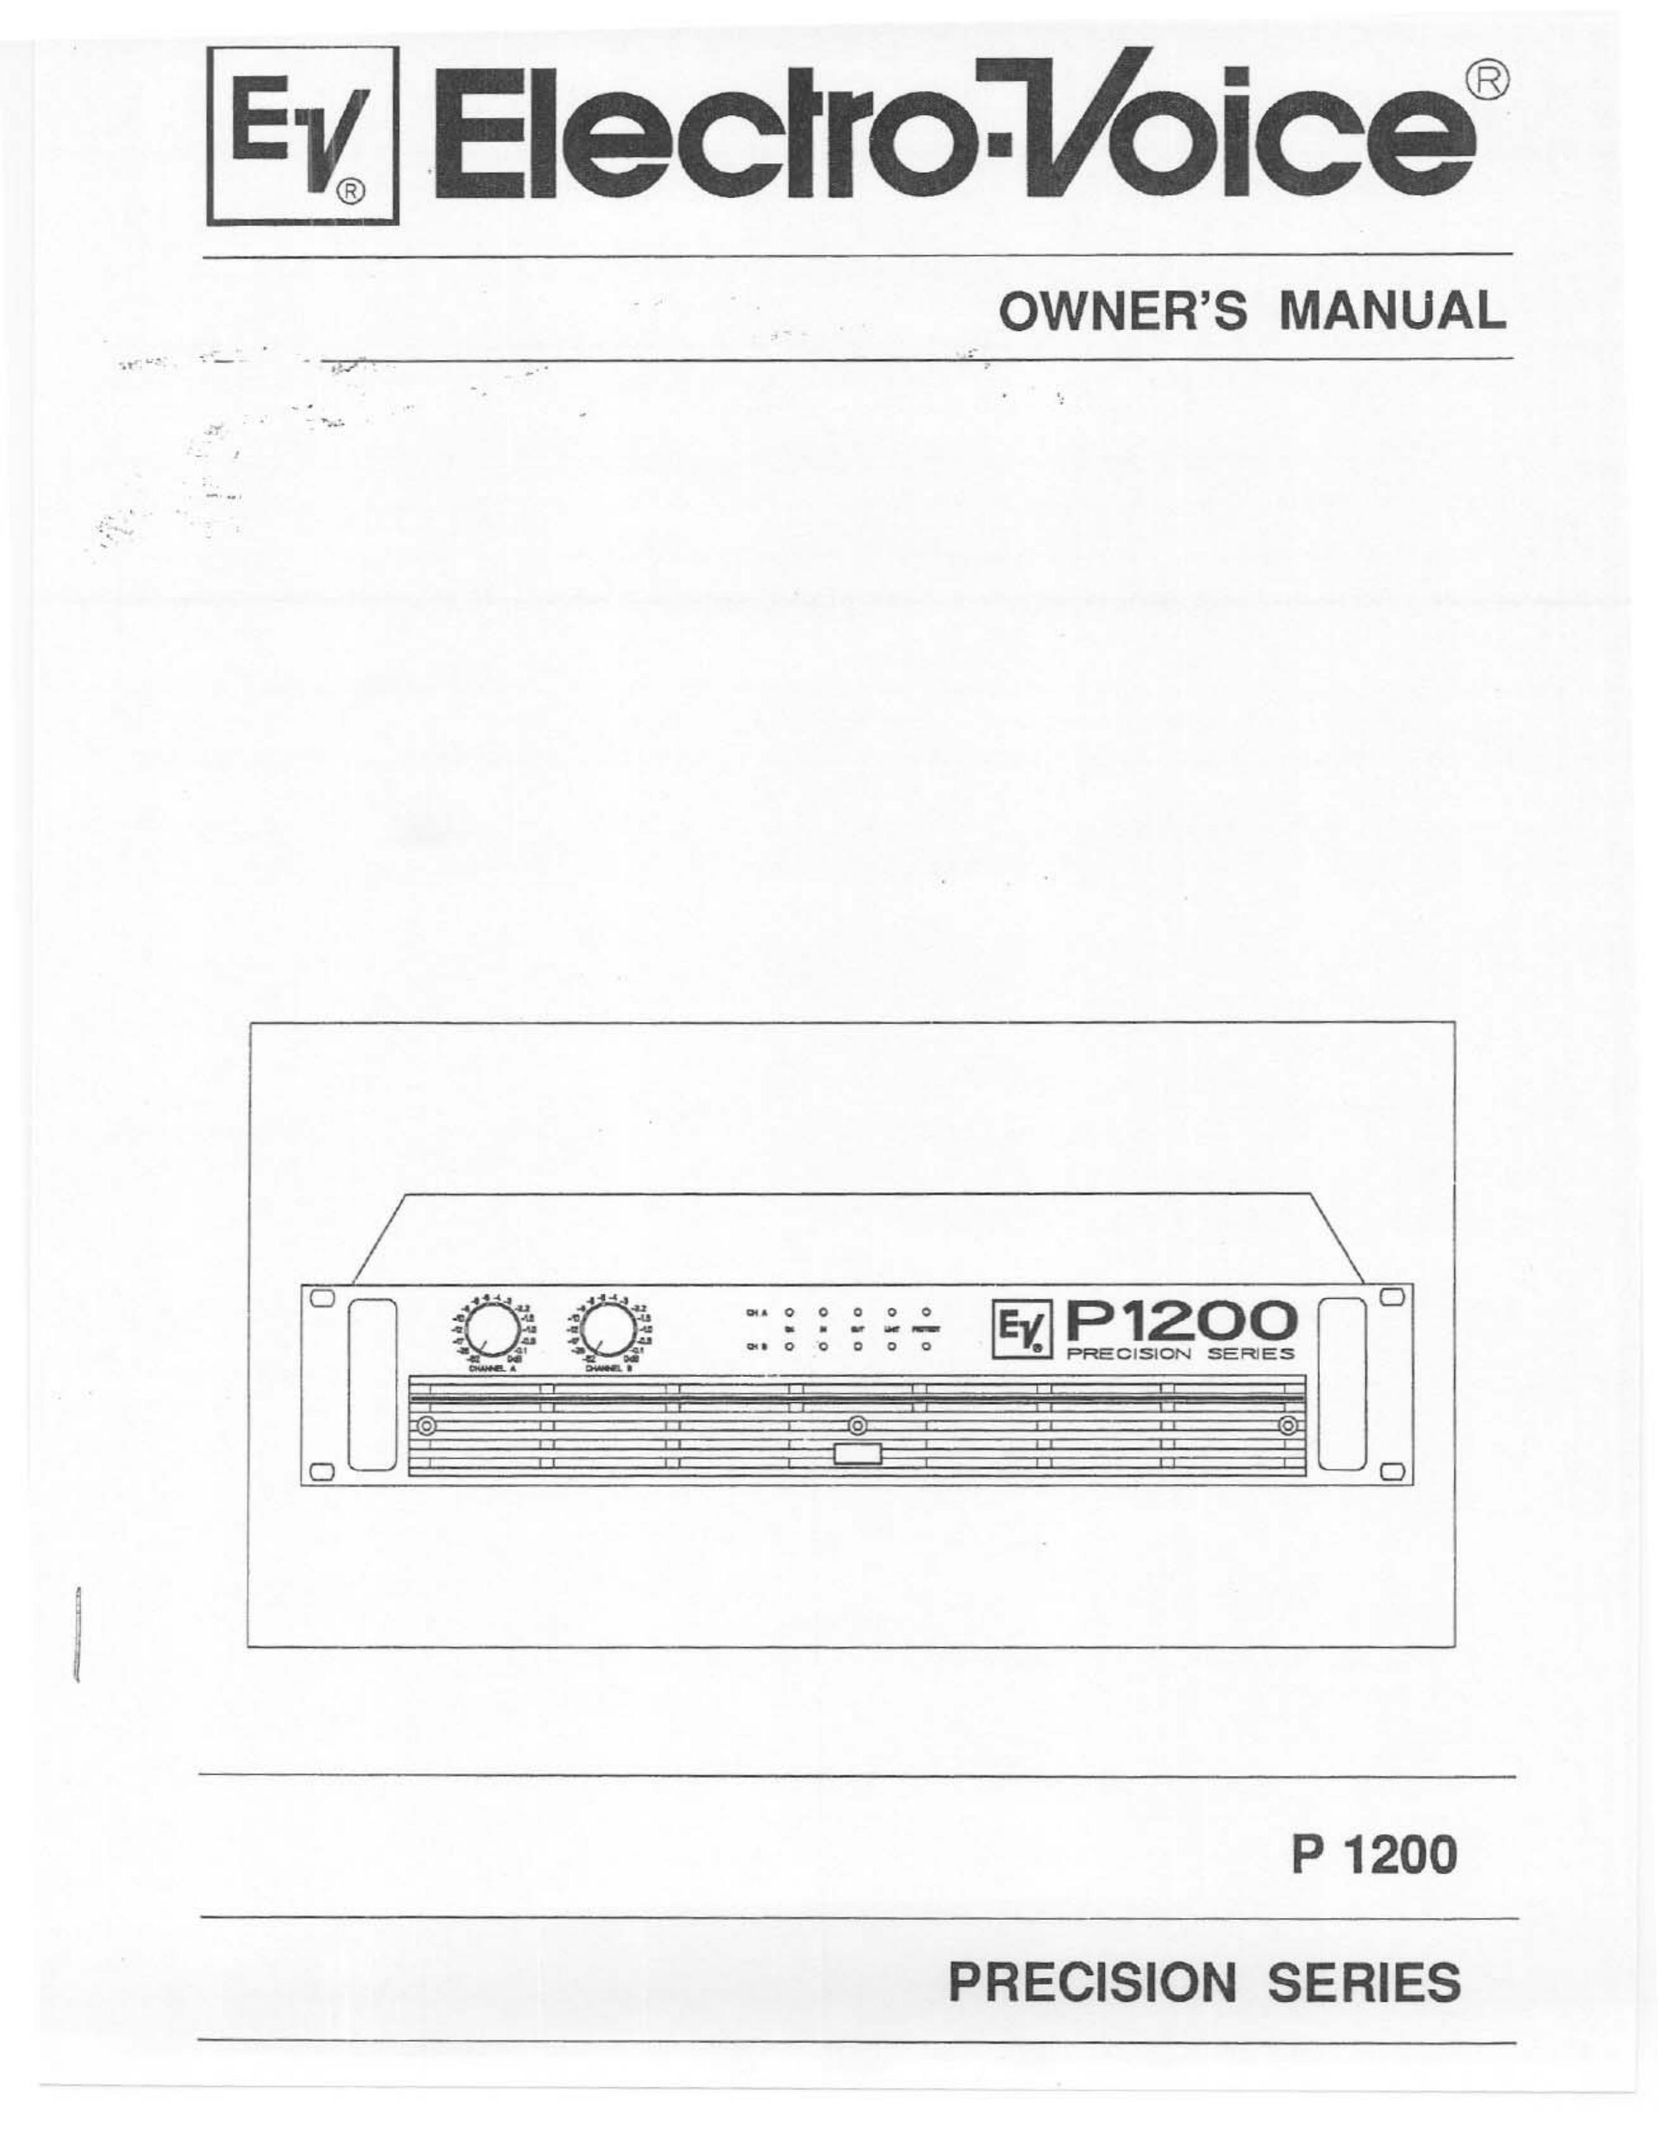 Electro-Voice P 1200 Home Security System User Manual